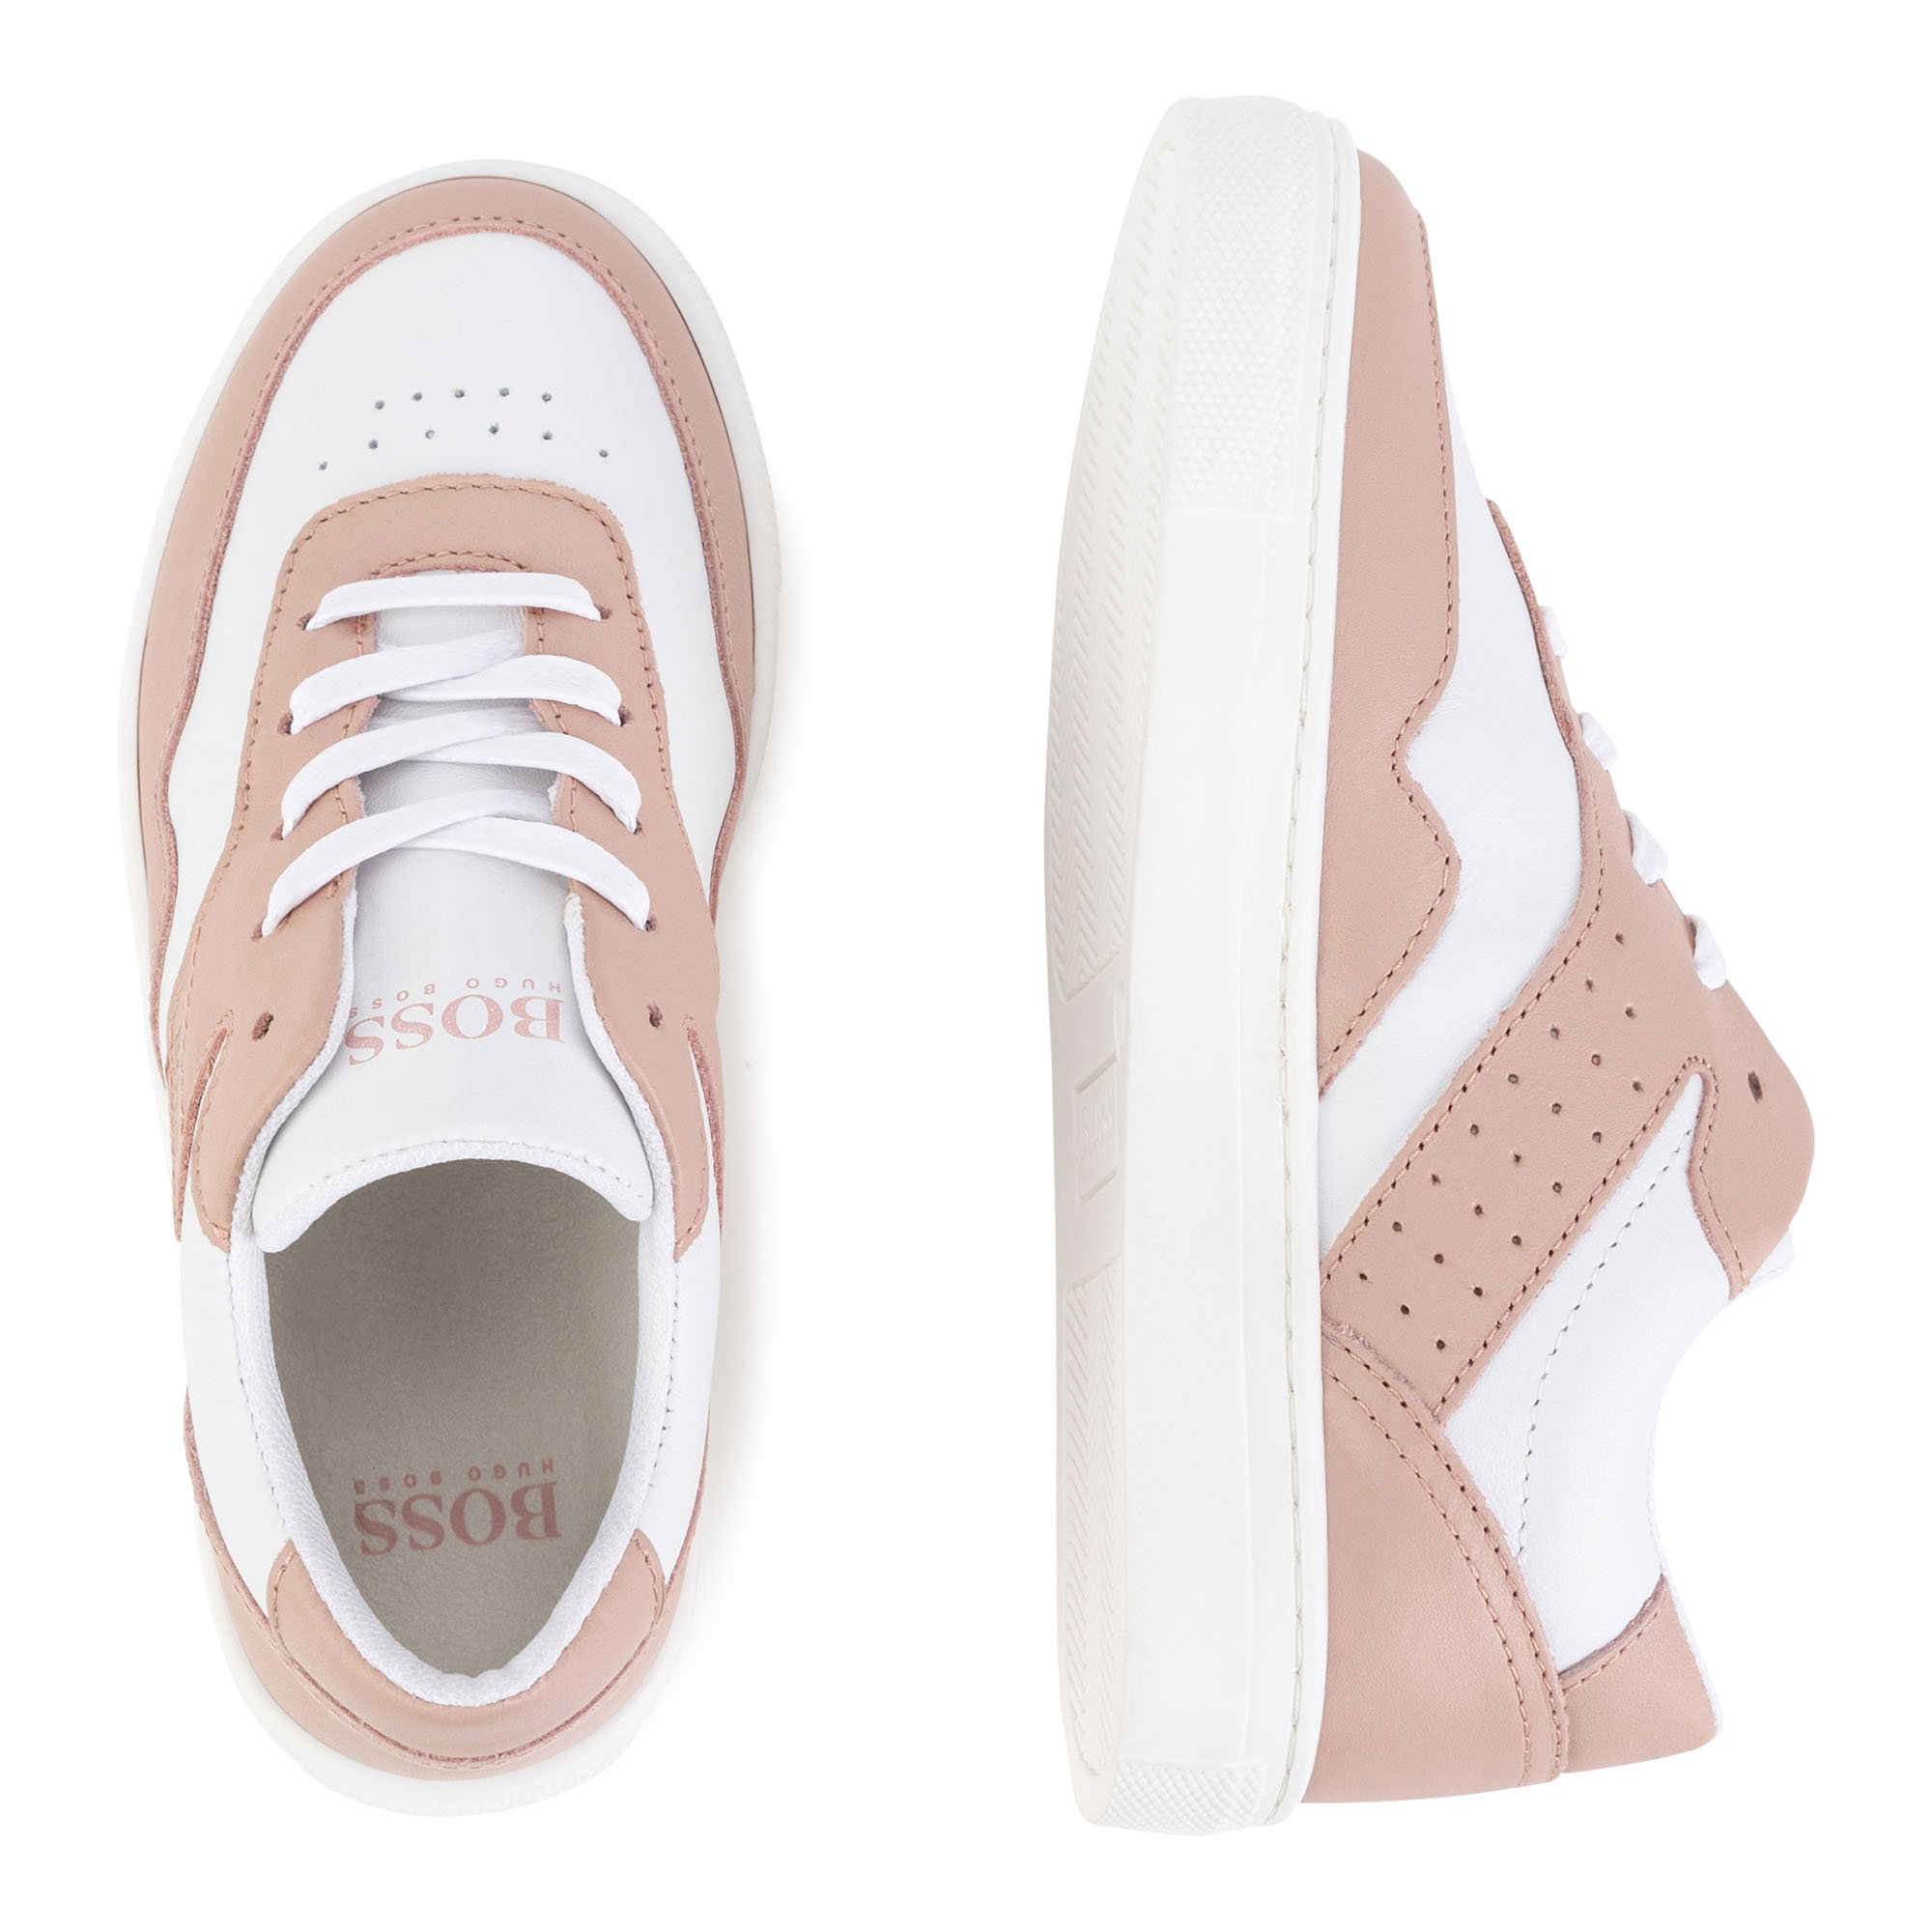 Two-tone leather sneakers BOSS for GIRL